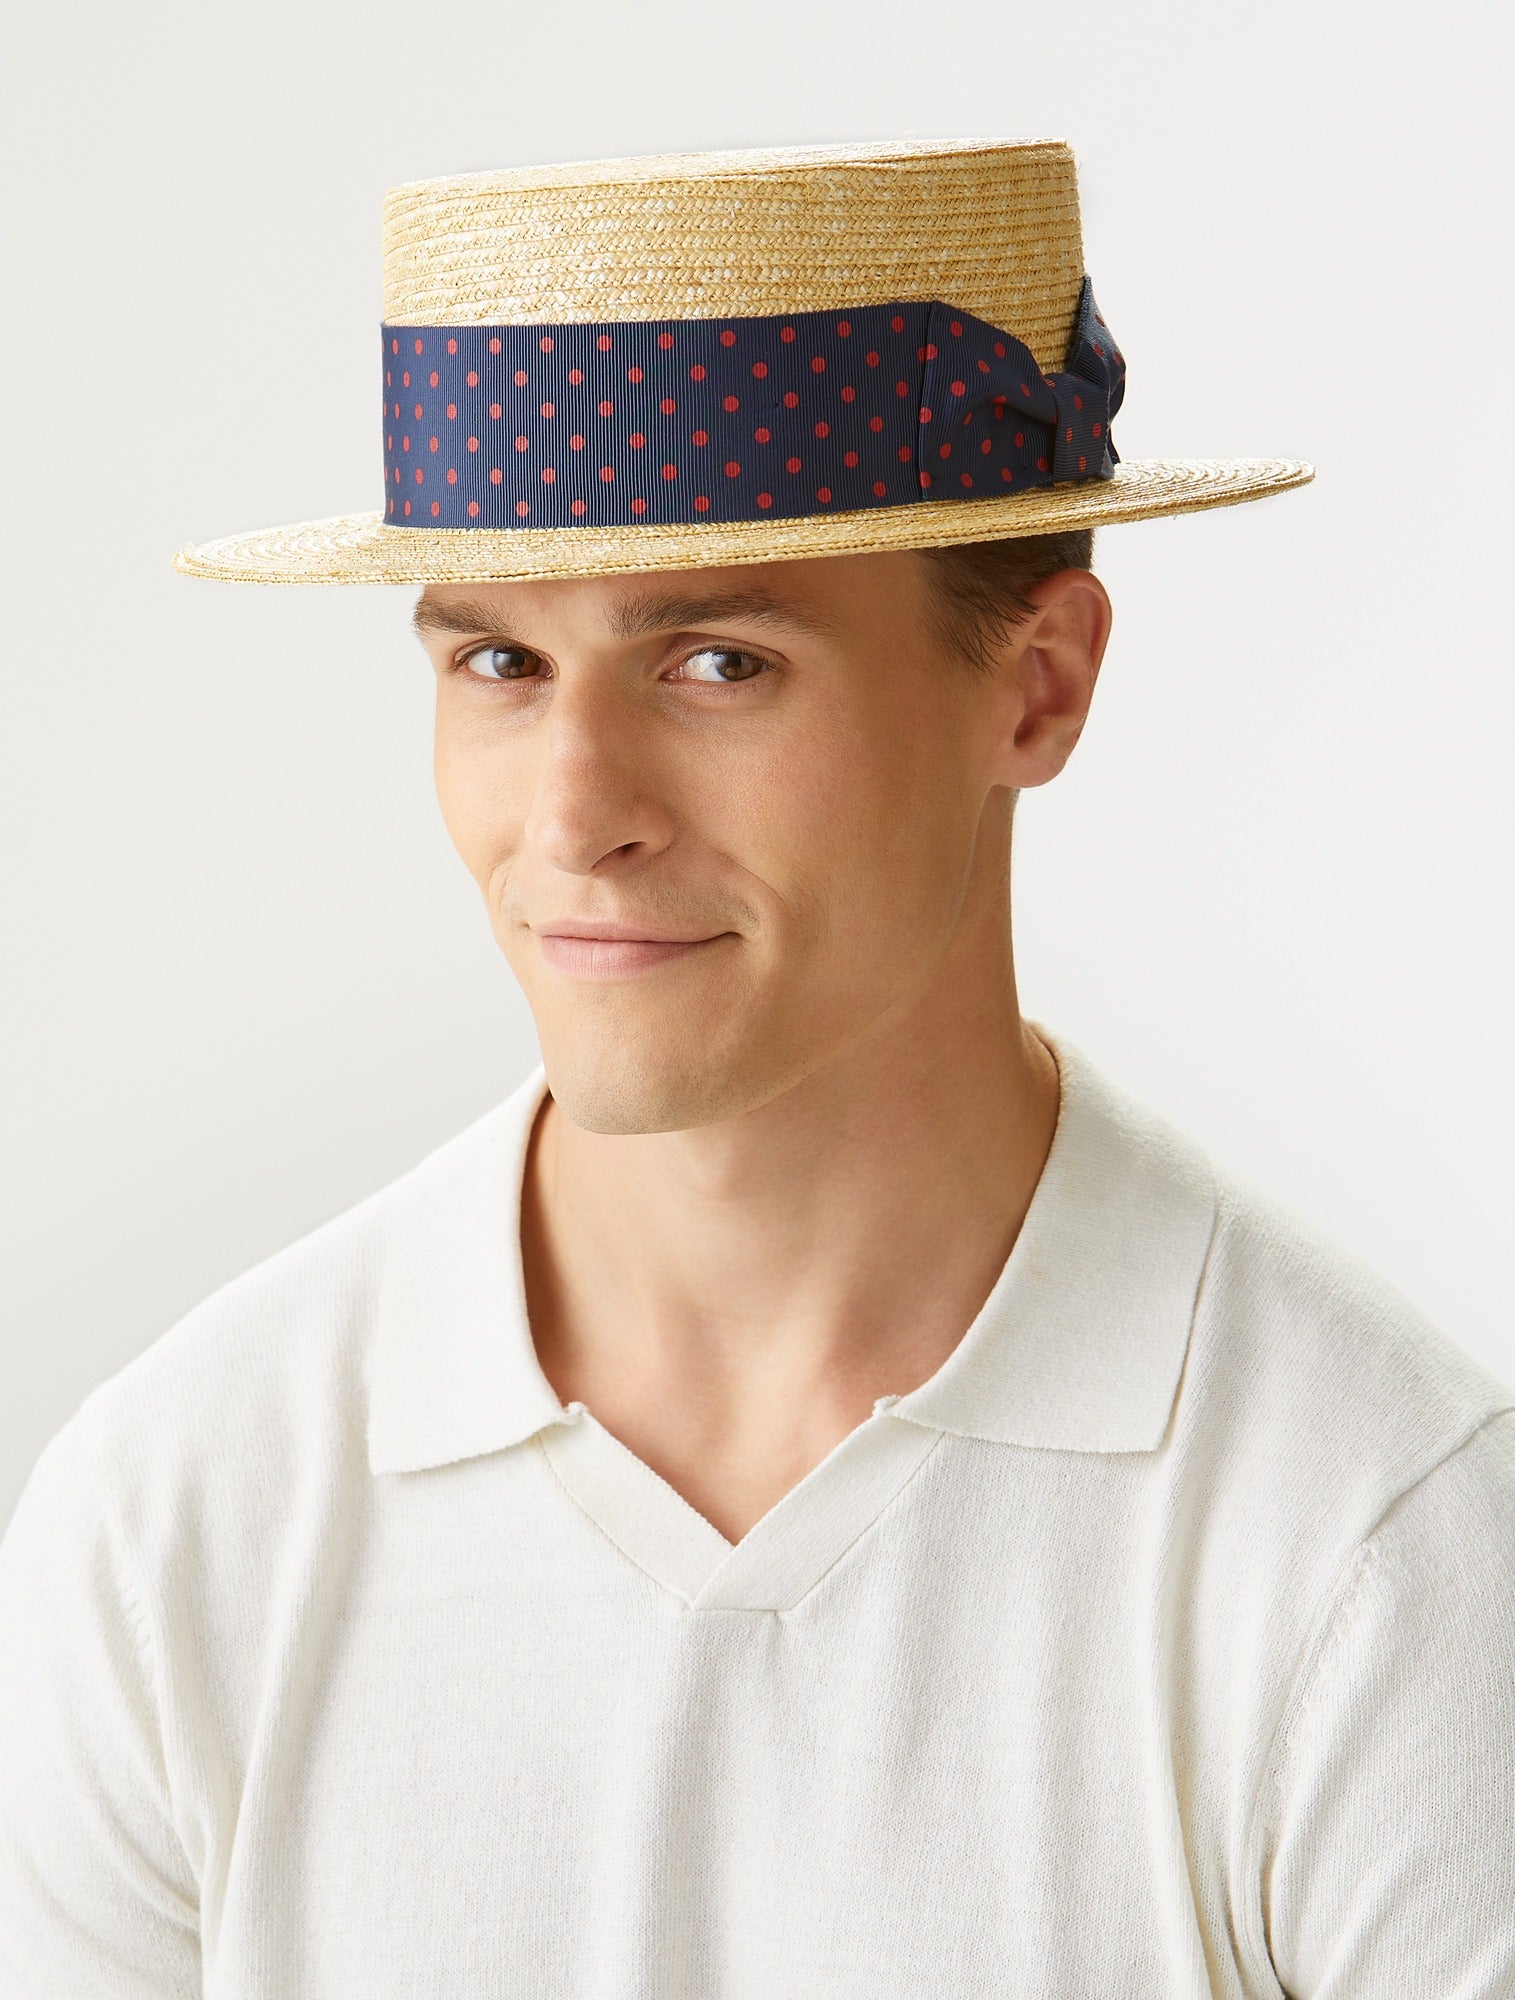 Oxford Boater - Mens Featured - Lock & Co. Hatters London UK